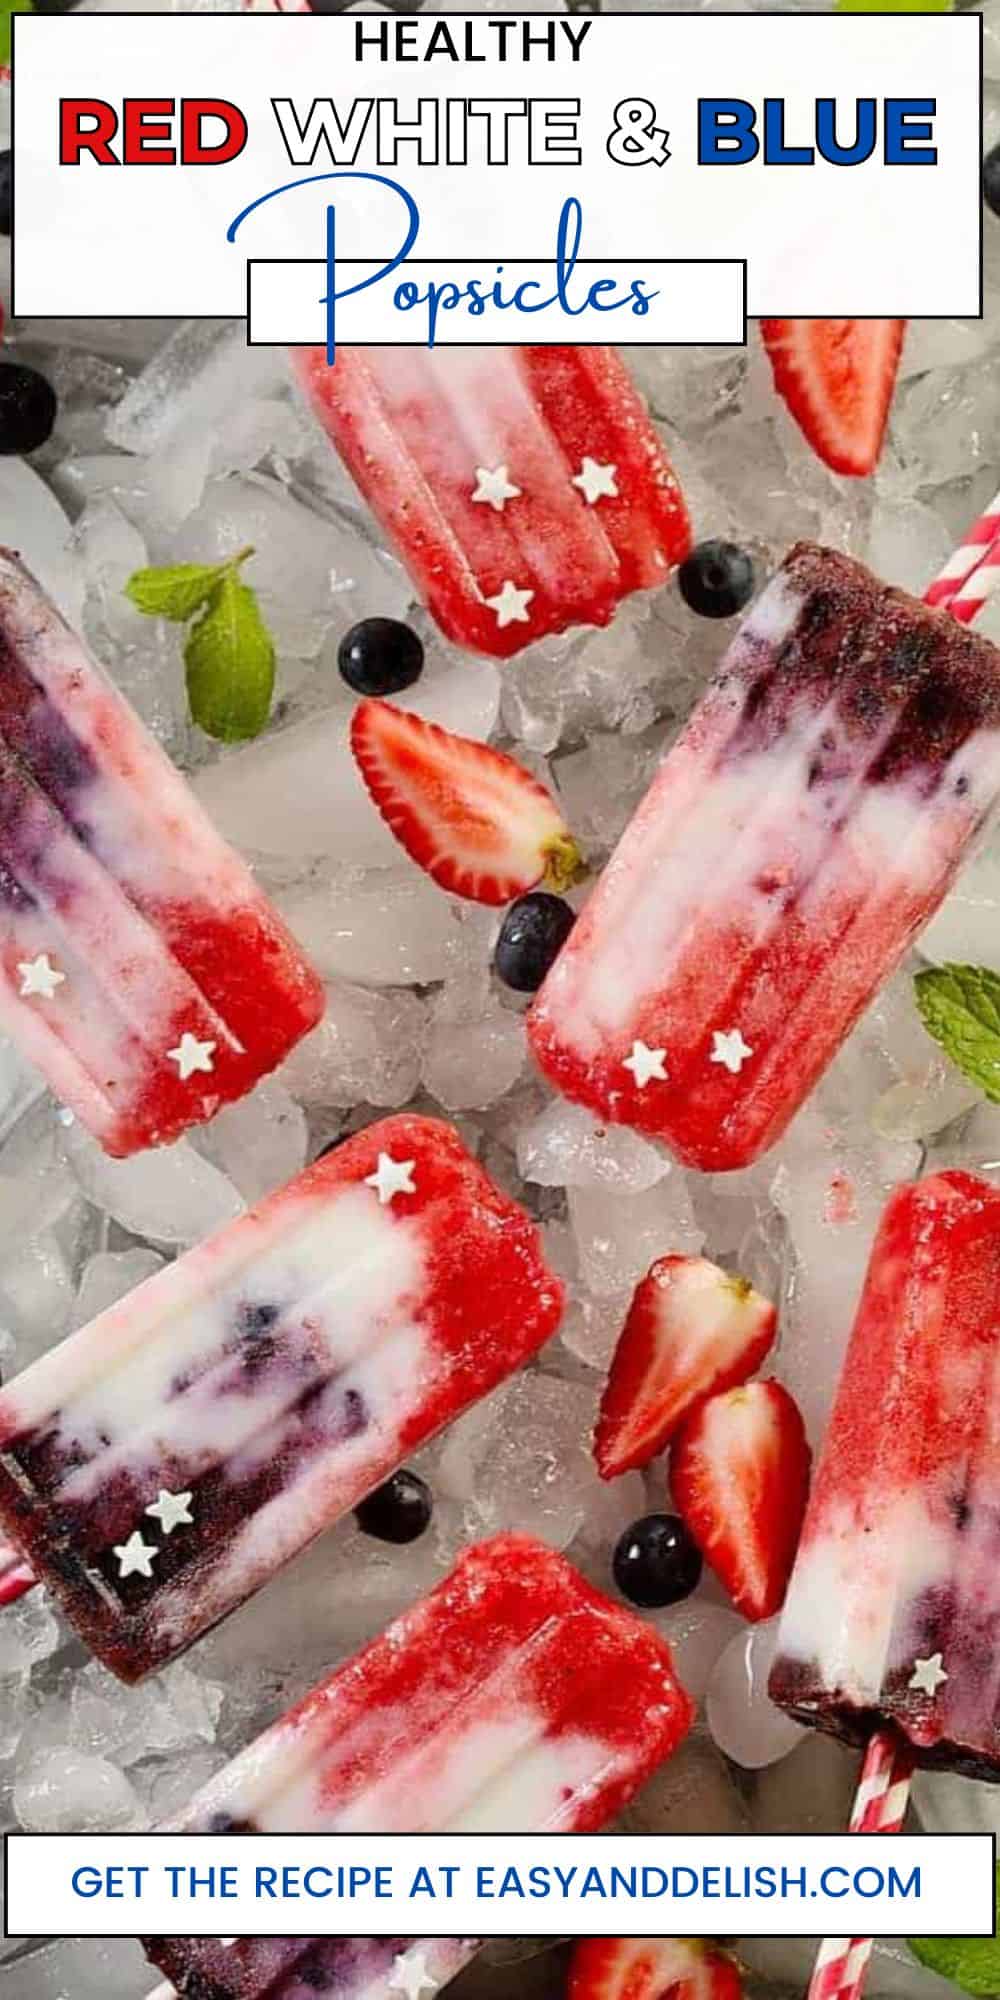 red, white and blue popsicles on ice.